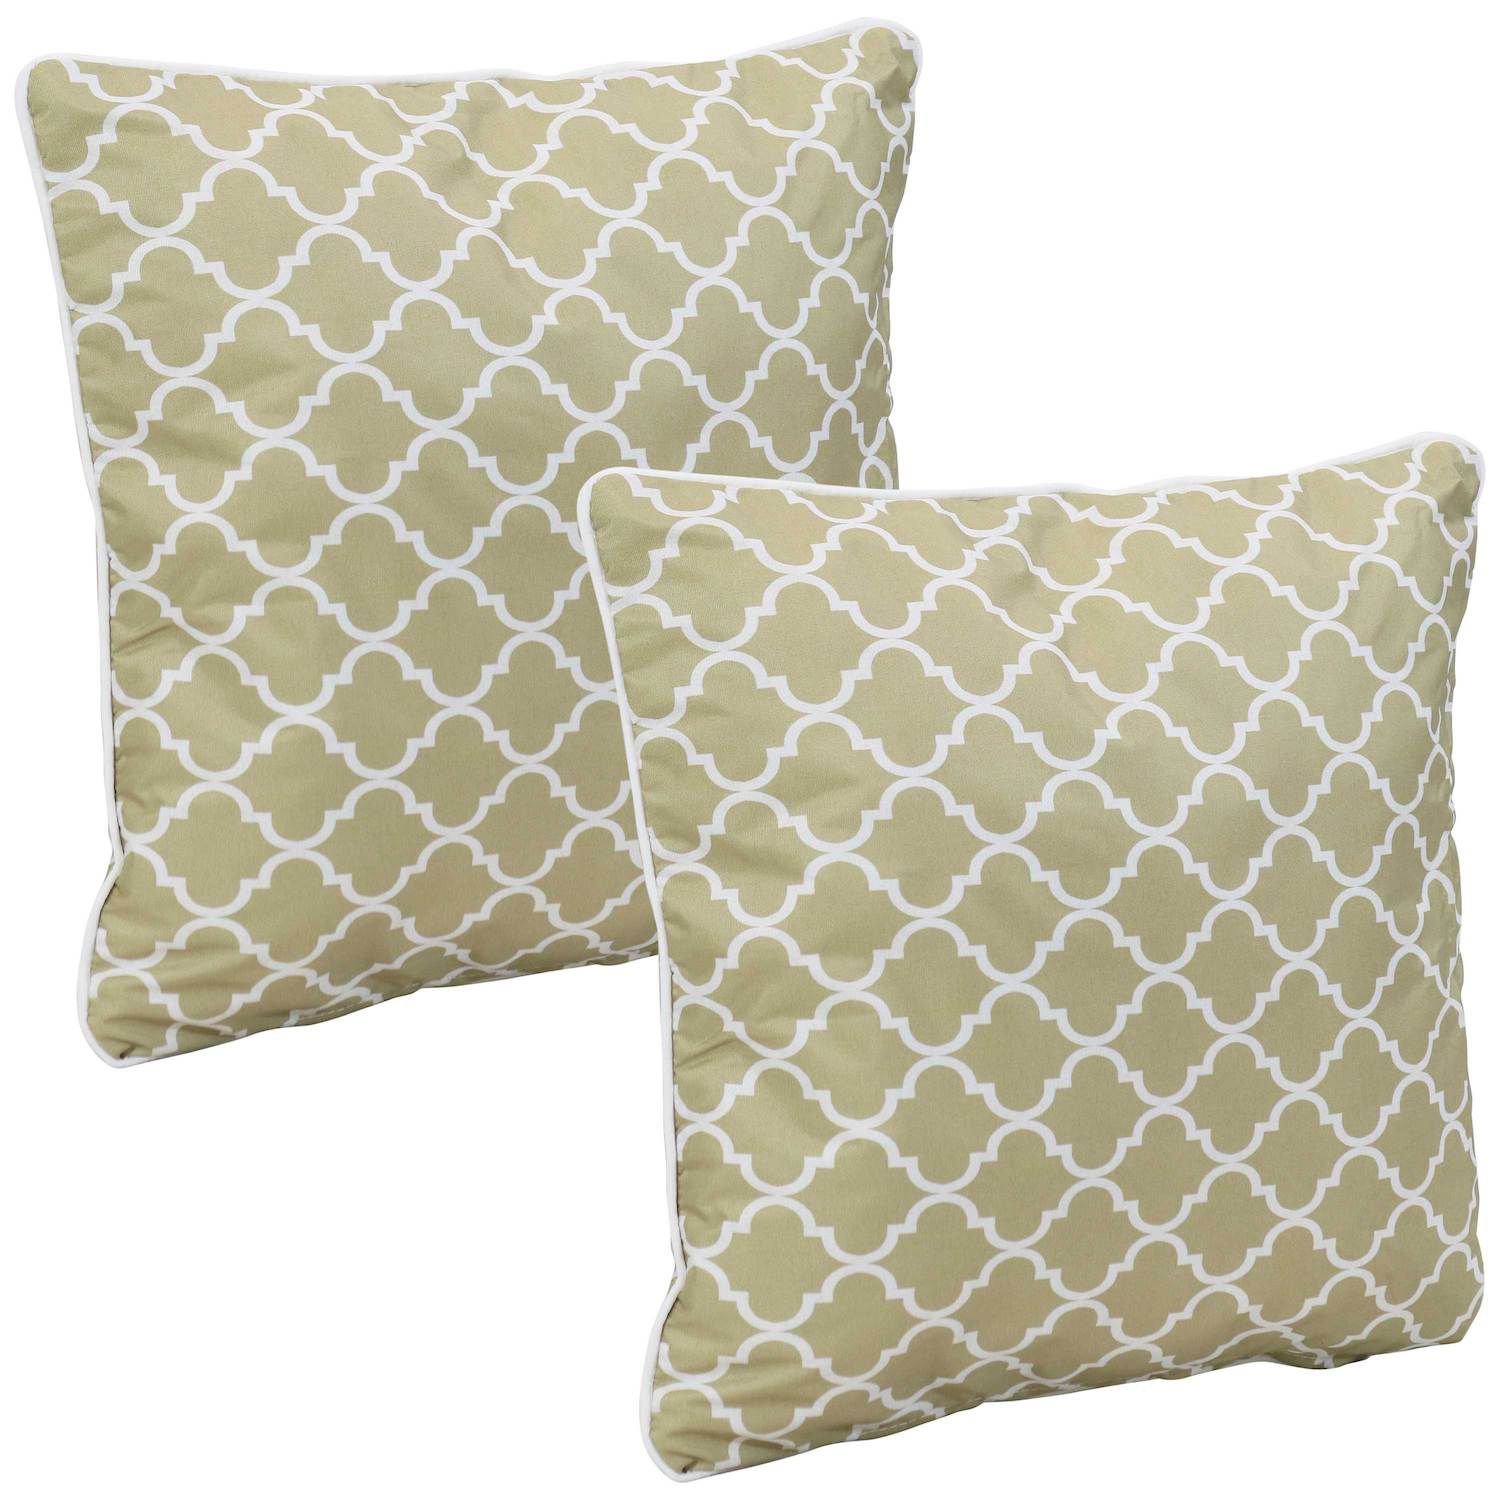  Codi 16x16 Outdoor Pillows - Premium Pillows Inserts Set of 2,  Water Resistant Upgraded Decorative Stuffing Throw Pillows for Patio  Furniture, Couch, Porch Indoor Outdoors : Home & Kitchen